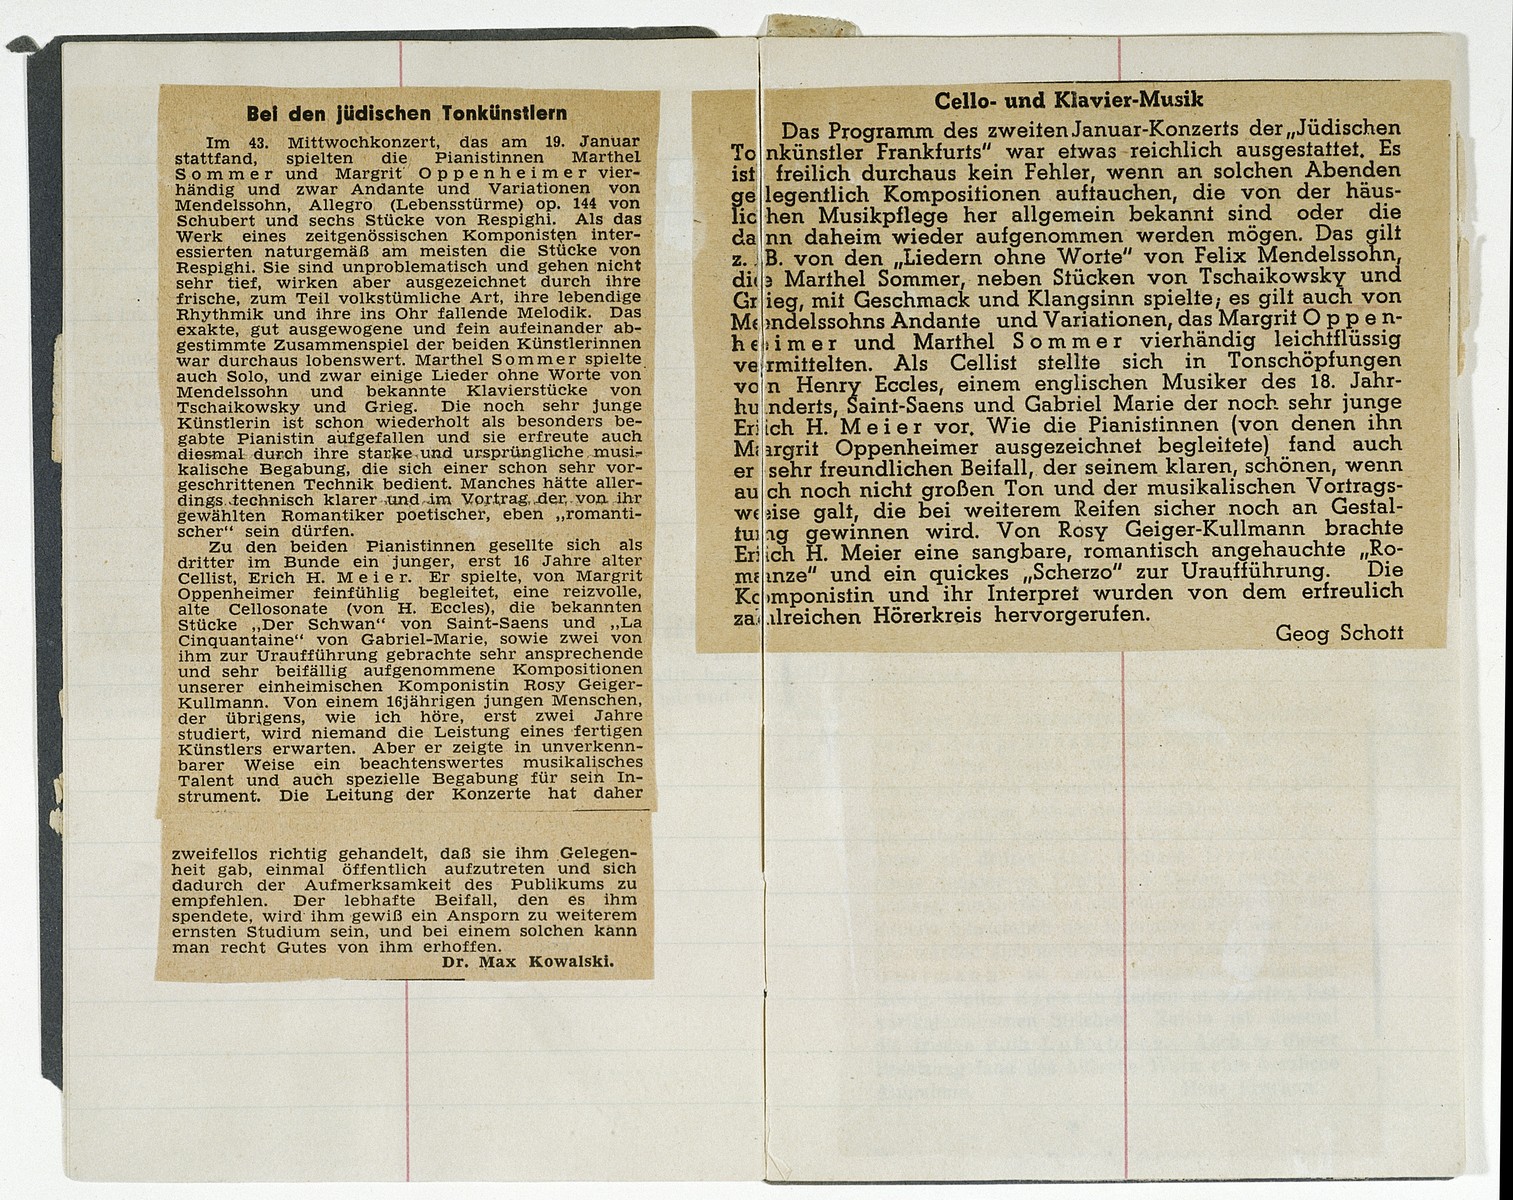 One page of a booklet containing newspaper clippings of concert reviews kept by Marthel Sommer, organist and pianist in the Juedischer Kulturbund [the Jewish Cultural Association] of Germany.